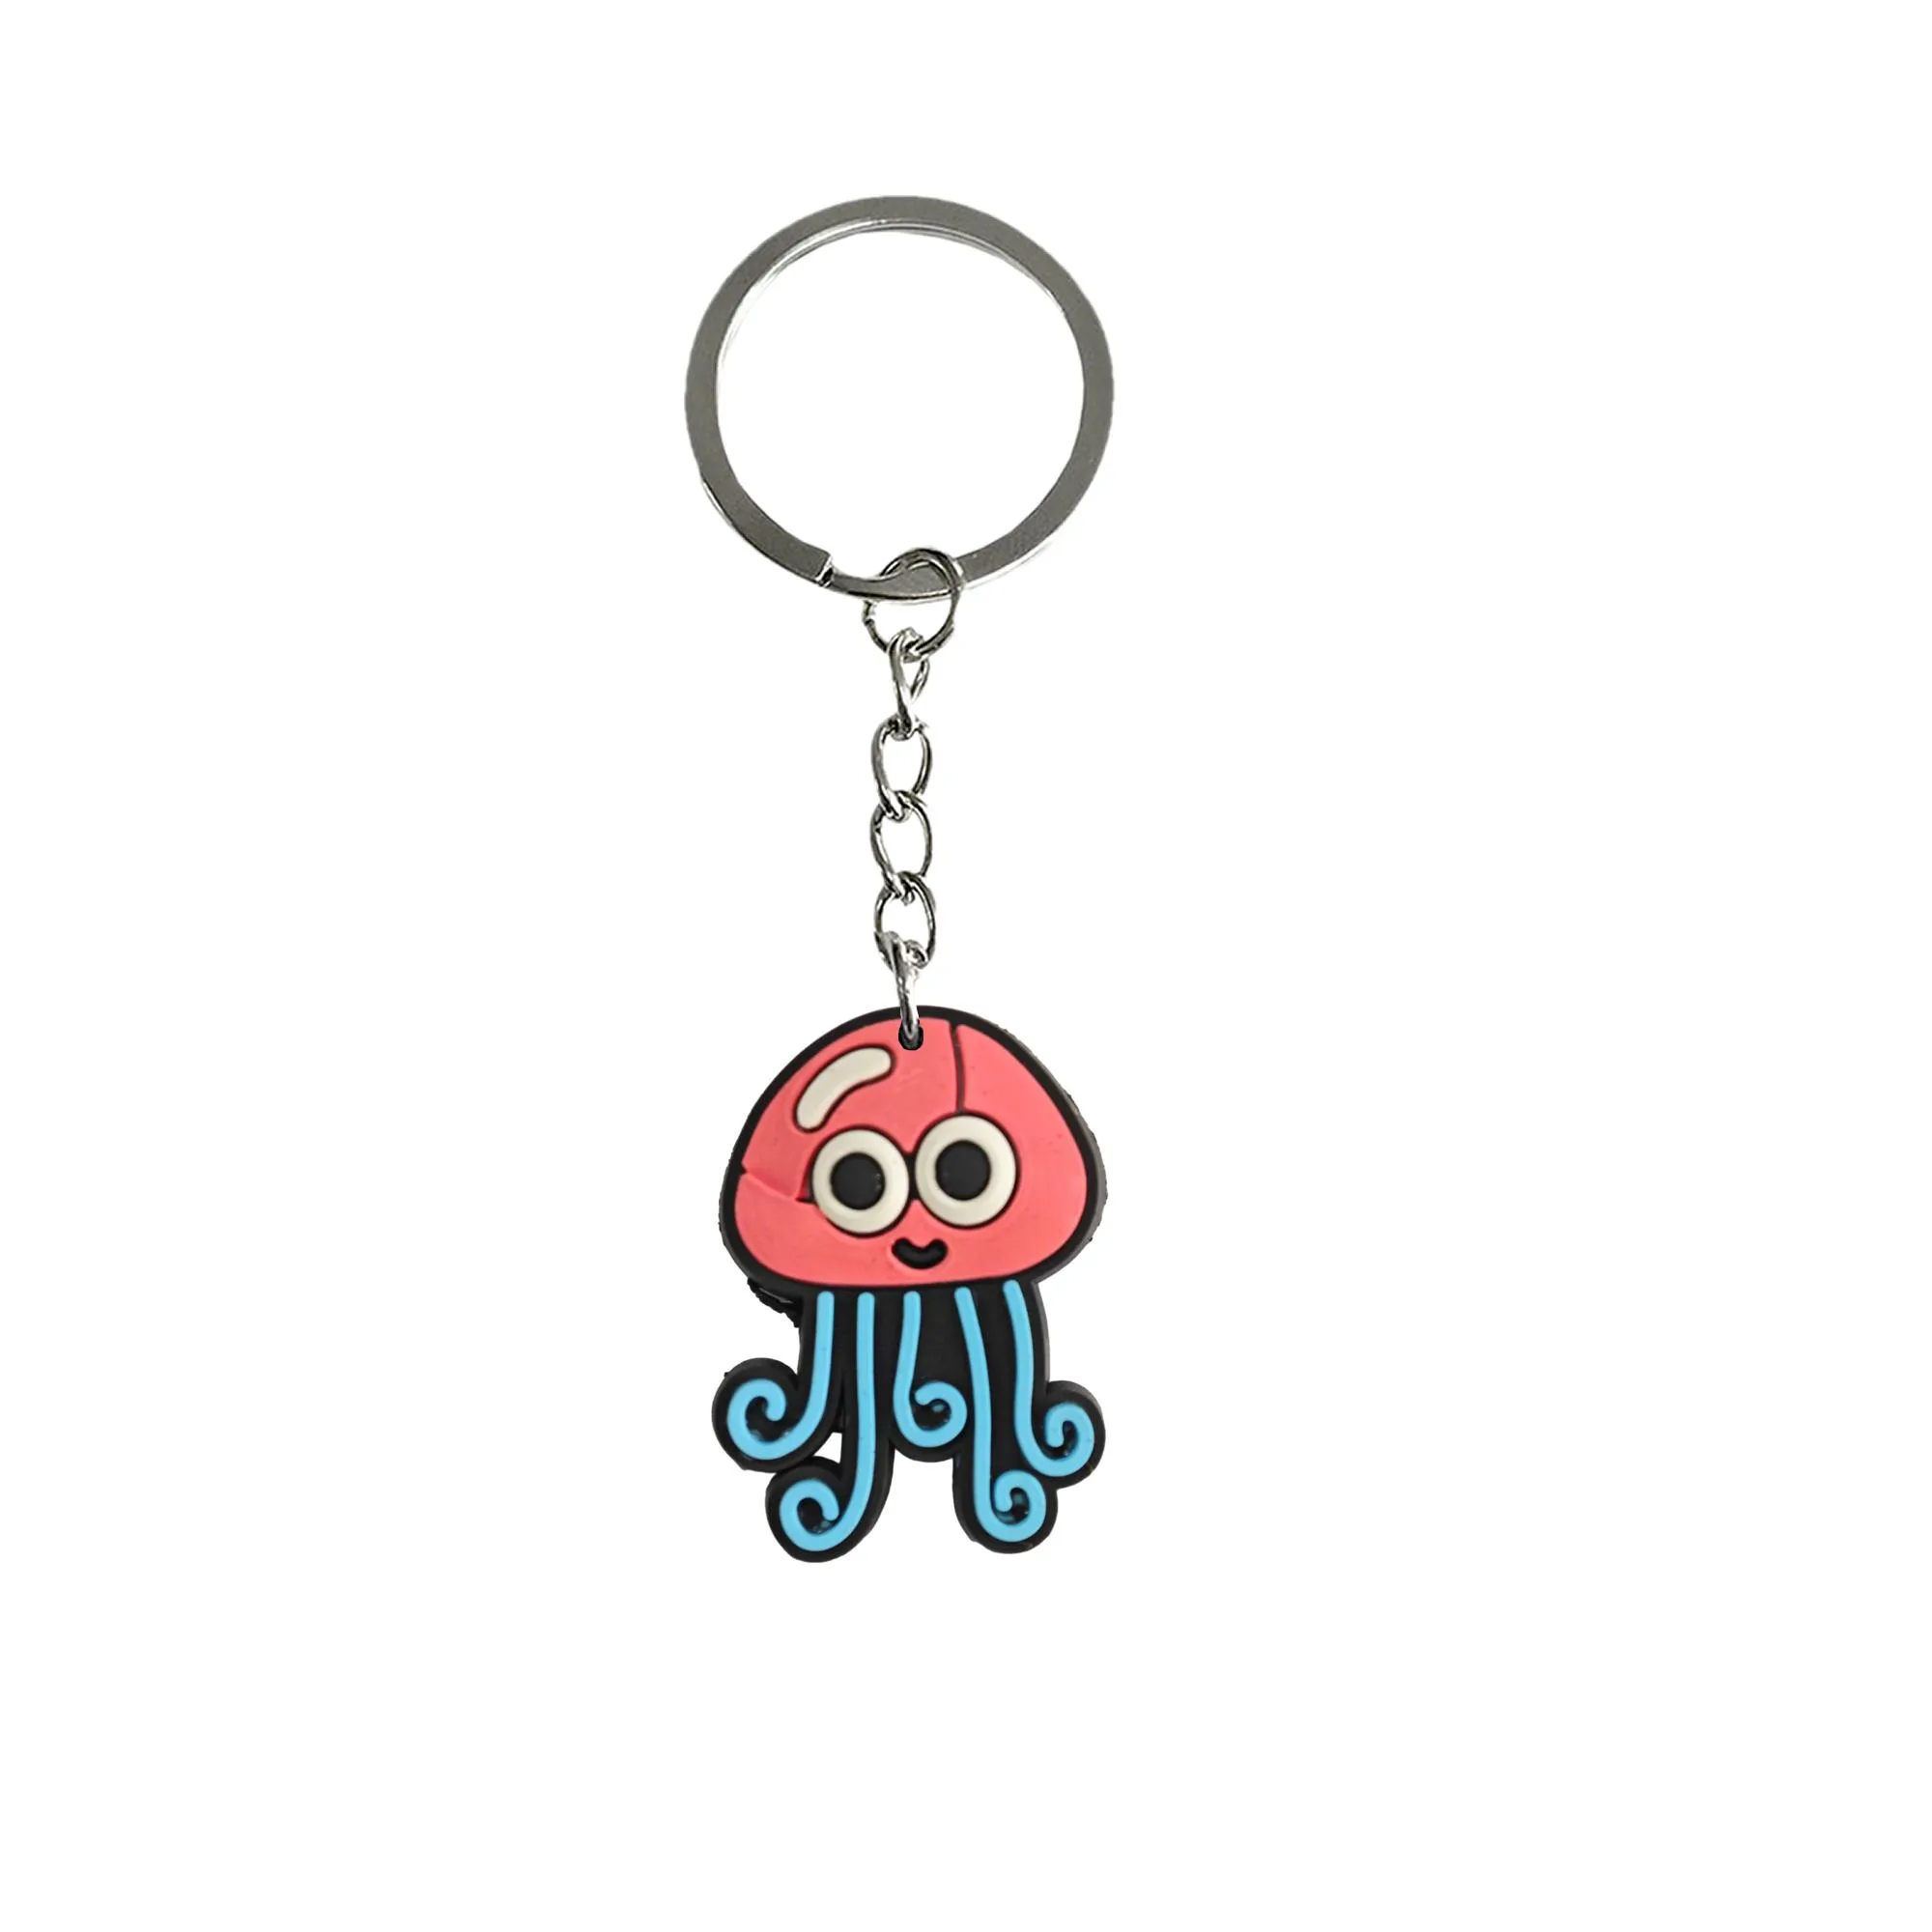 ocean world keychain key ring for girls cute silicone chain adult gift boys keyring suitable schoolbag birthday christmas party favors couple backpack chains women